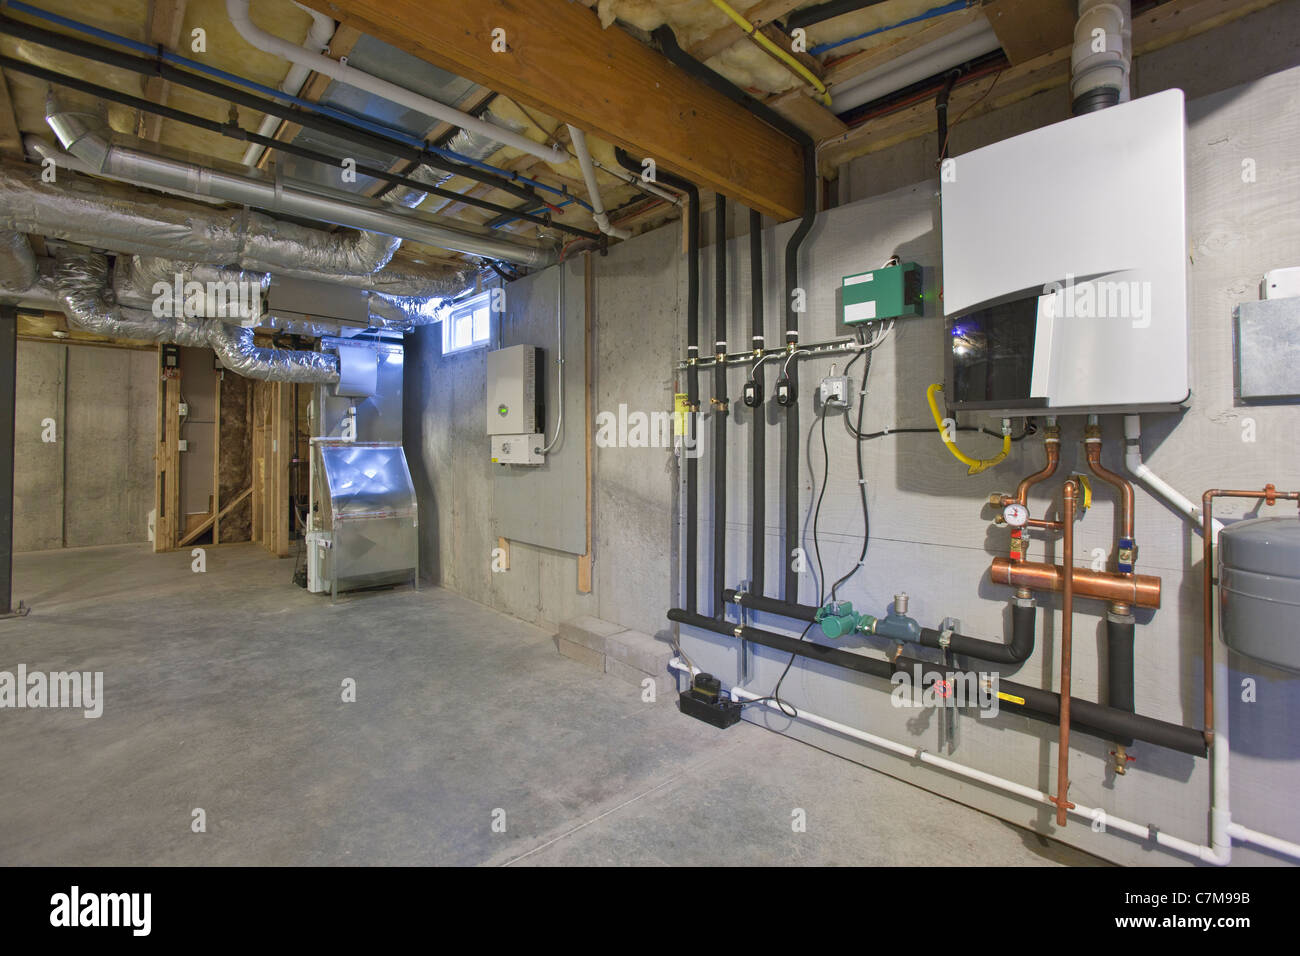 Heating and A/C system, photovoltaic inverter, and tankless hot water system in the basement of a Green Technology Home Stock Photo